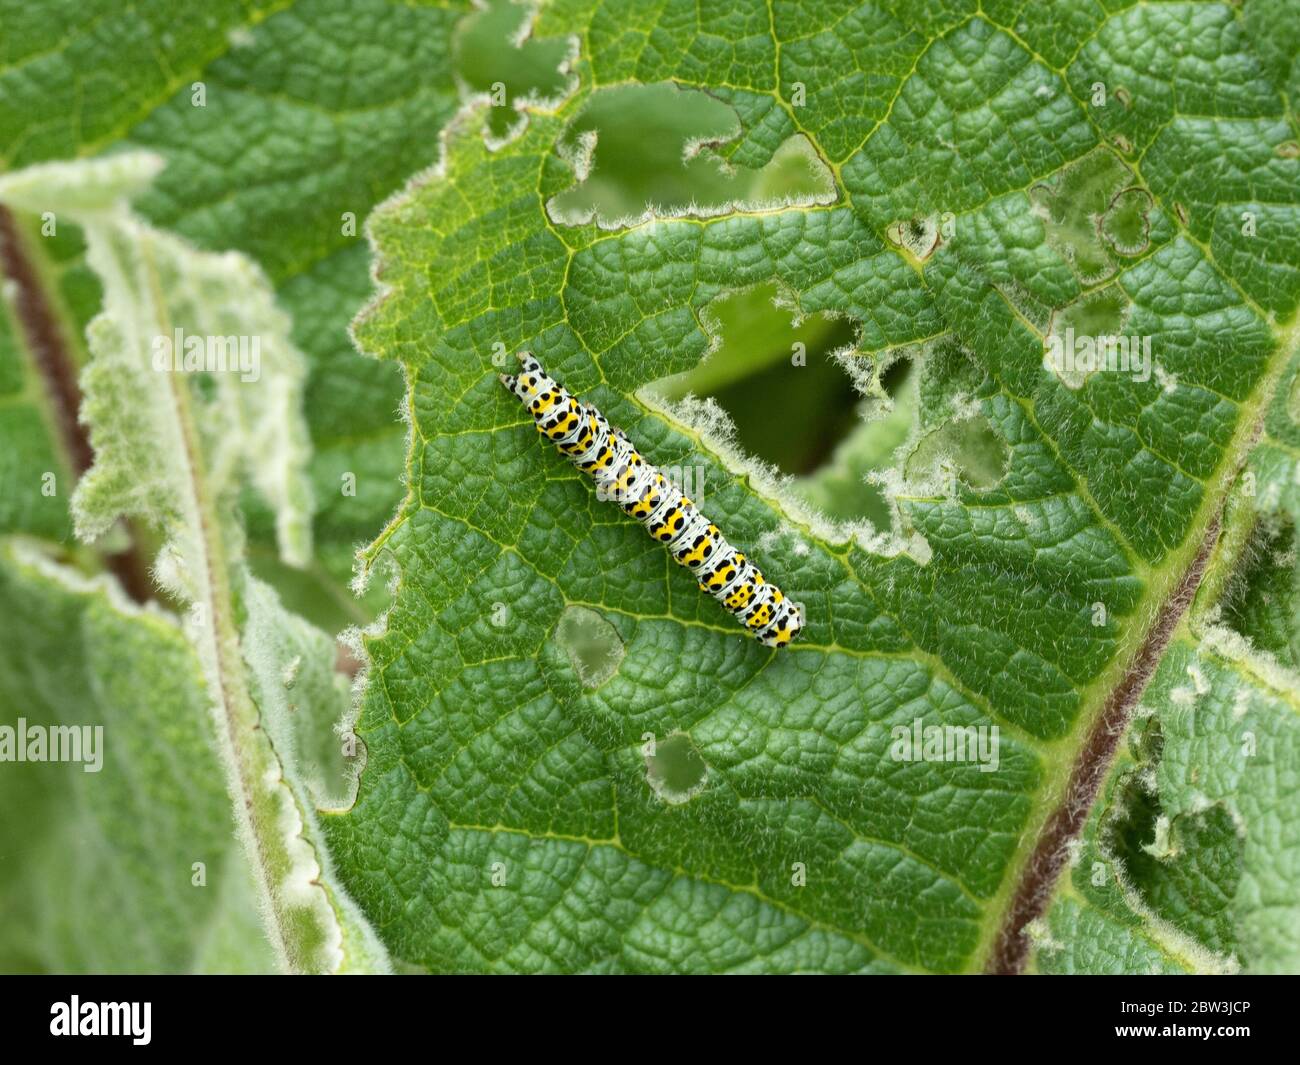 A close up of a caterpillar of the mullein moth Cucullia verbasci feeding on Verbascum foliage Stock Photo